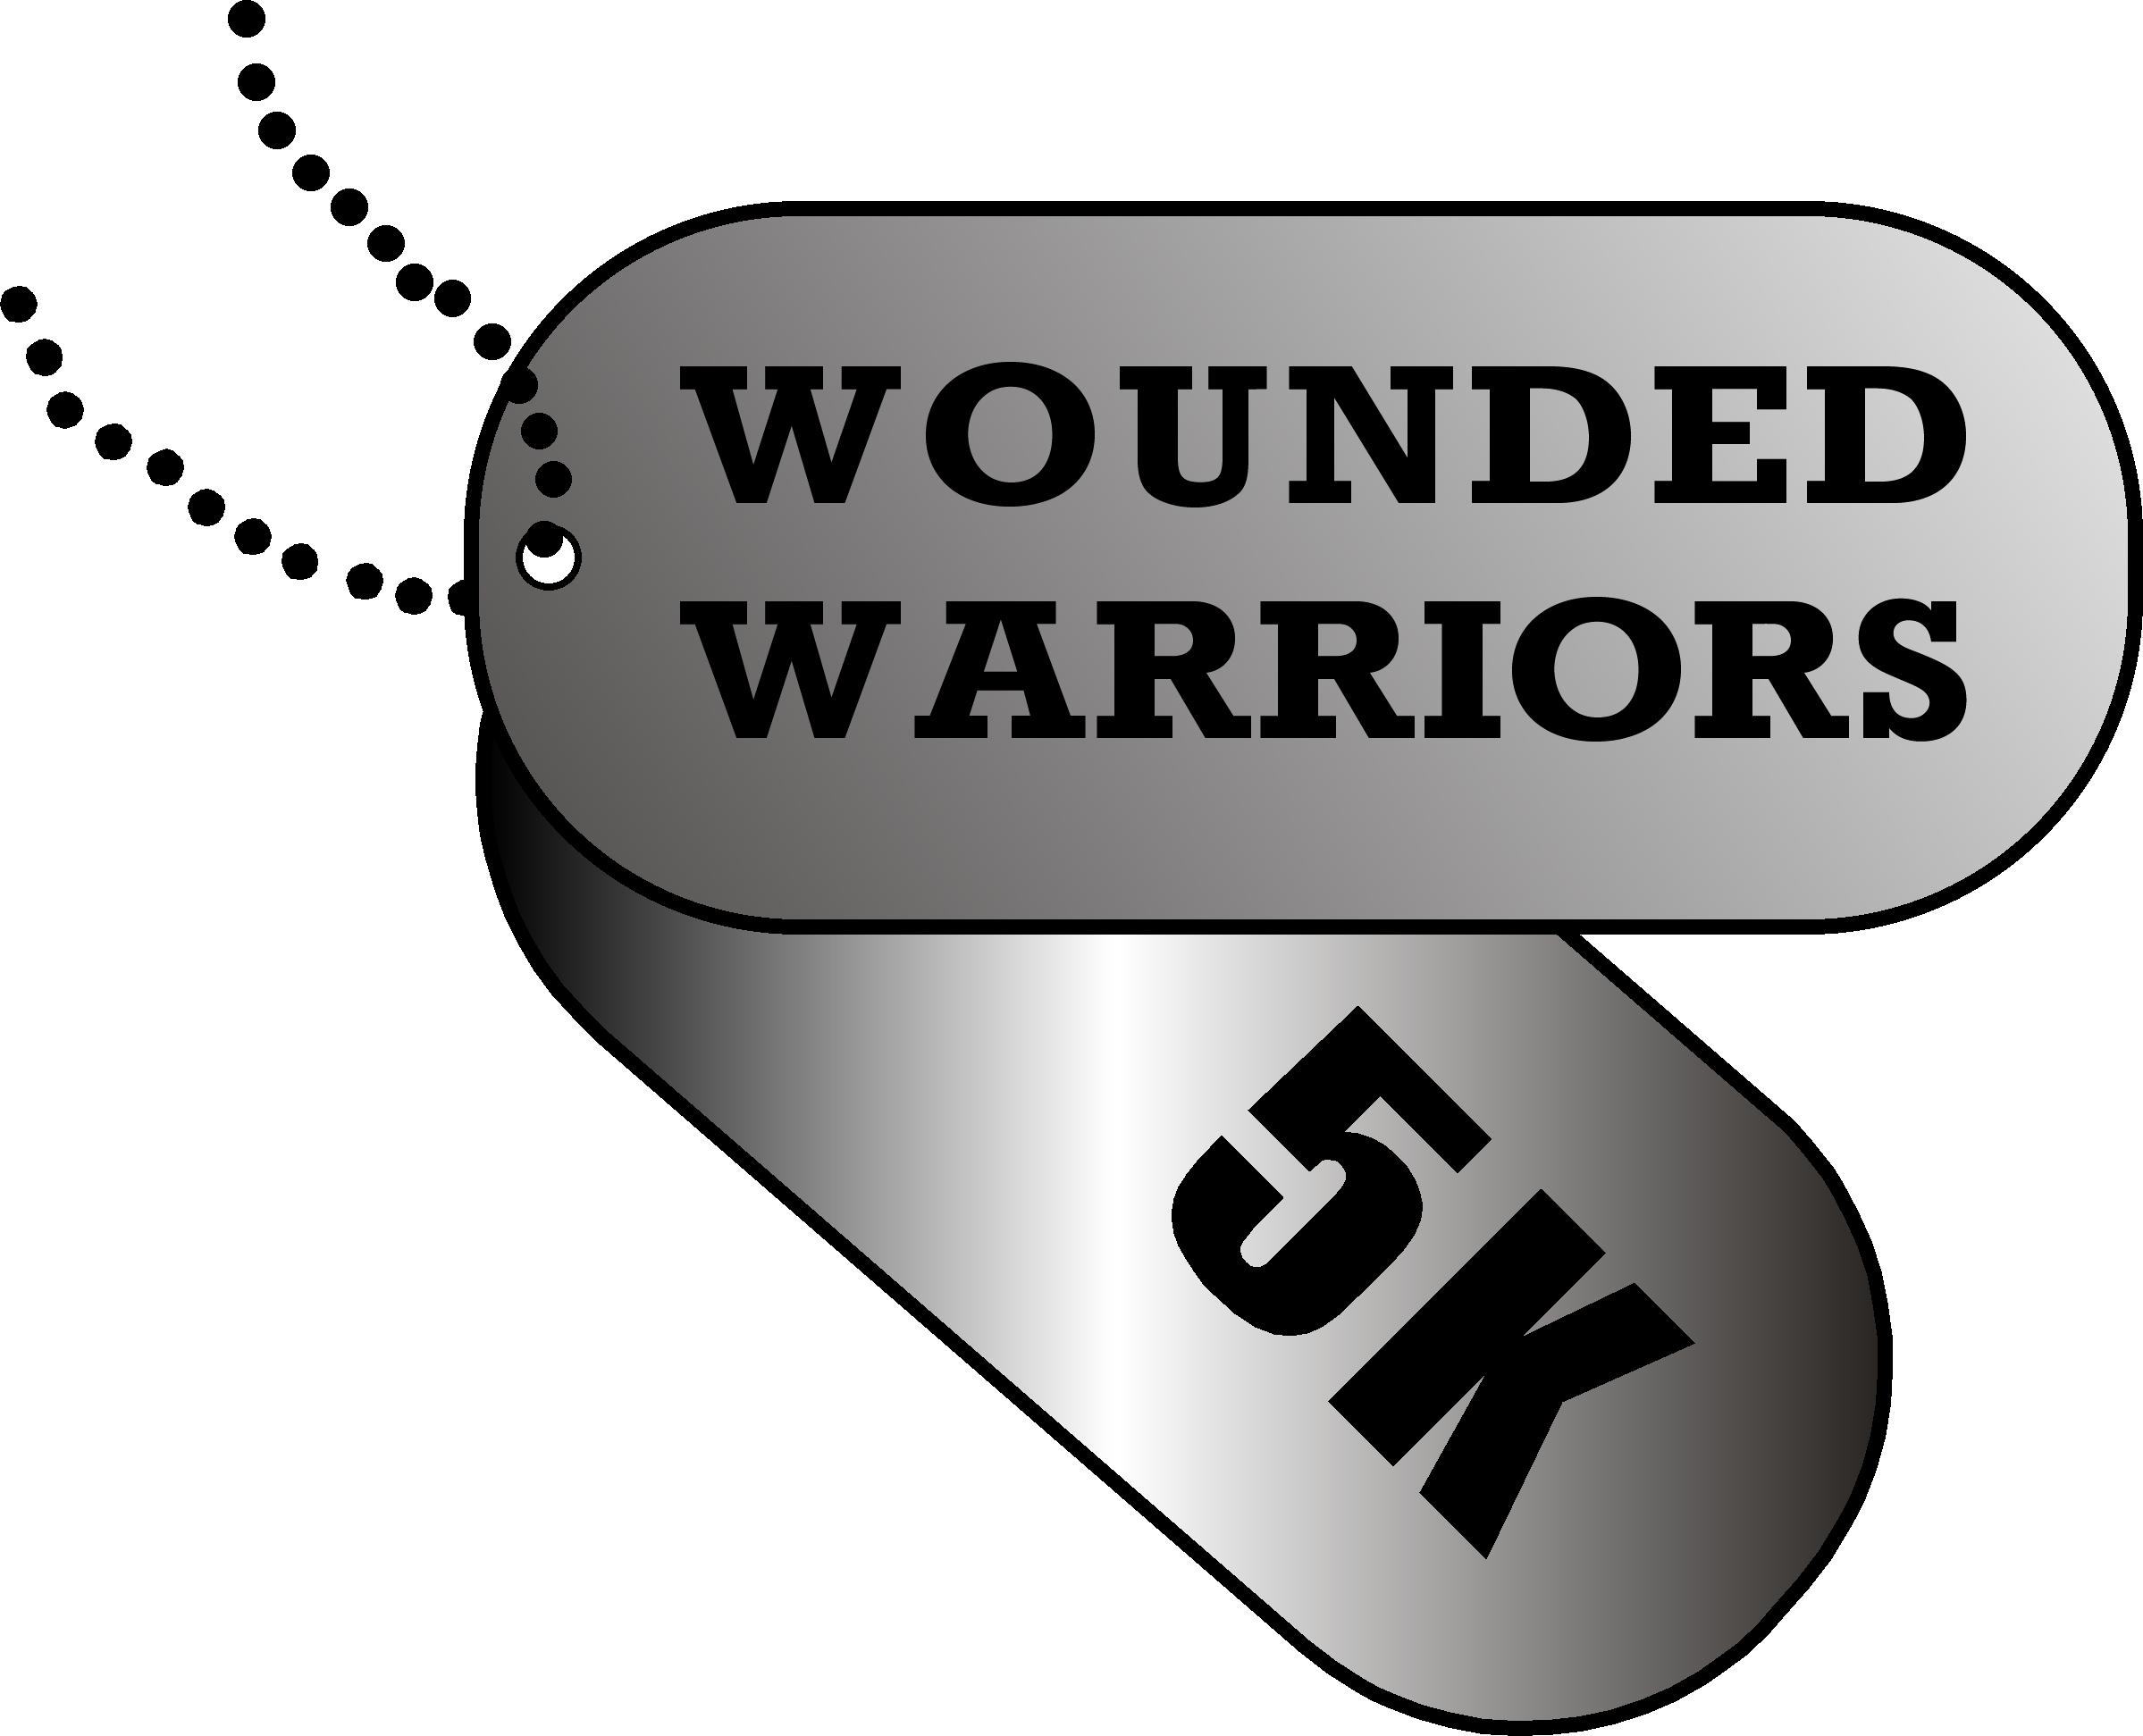 WOUNDED WARRIORS 5K